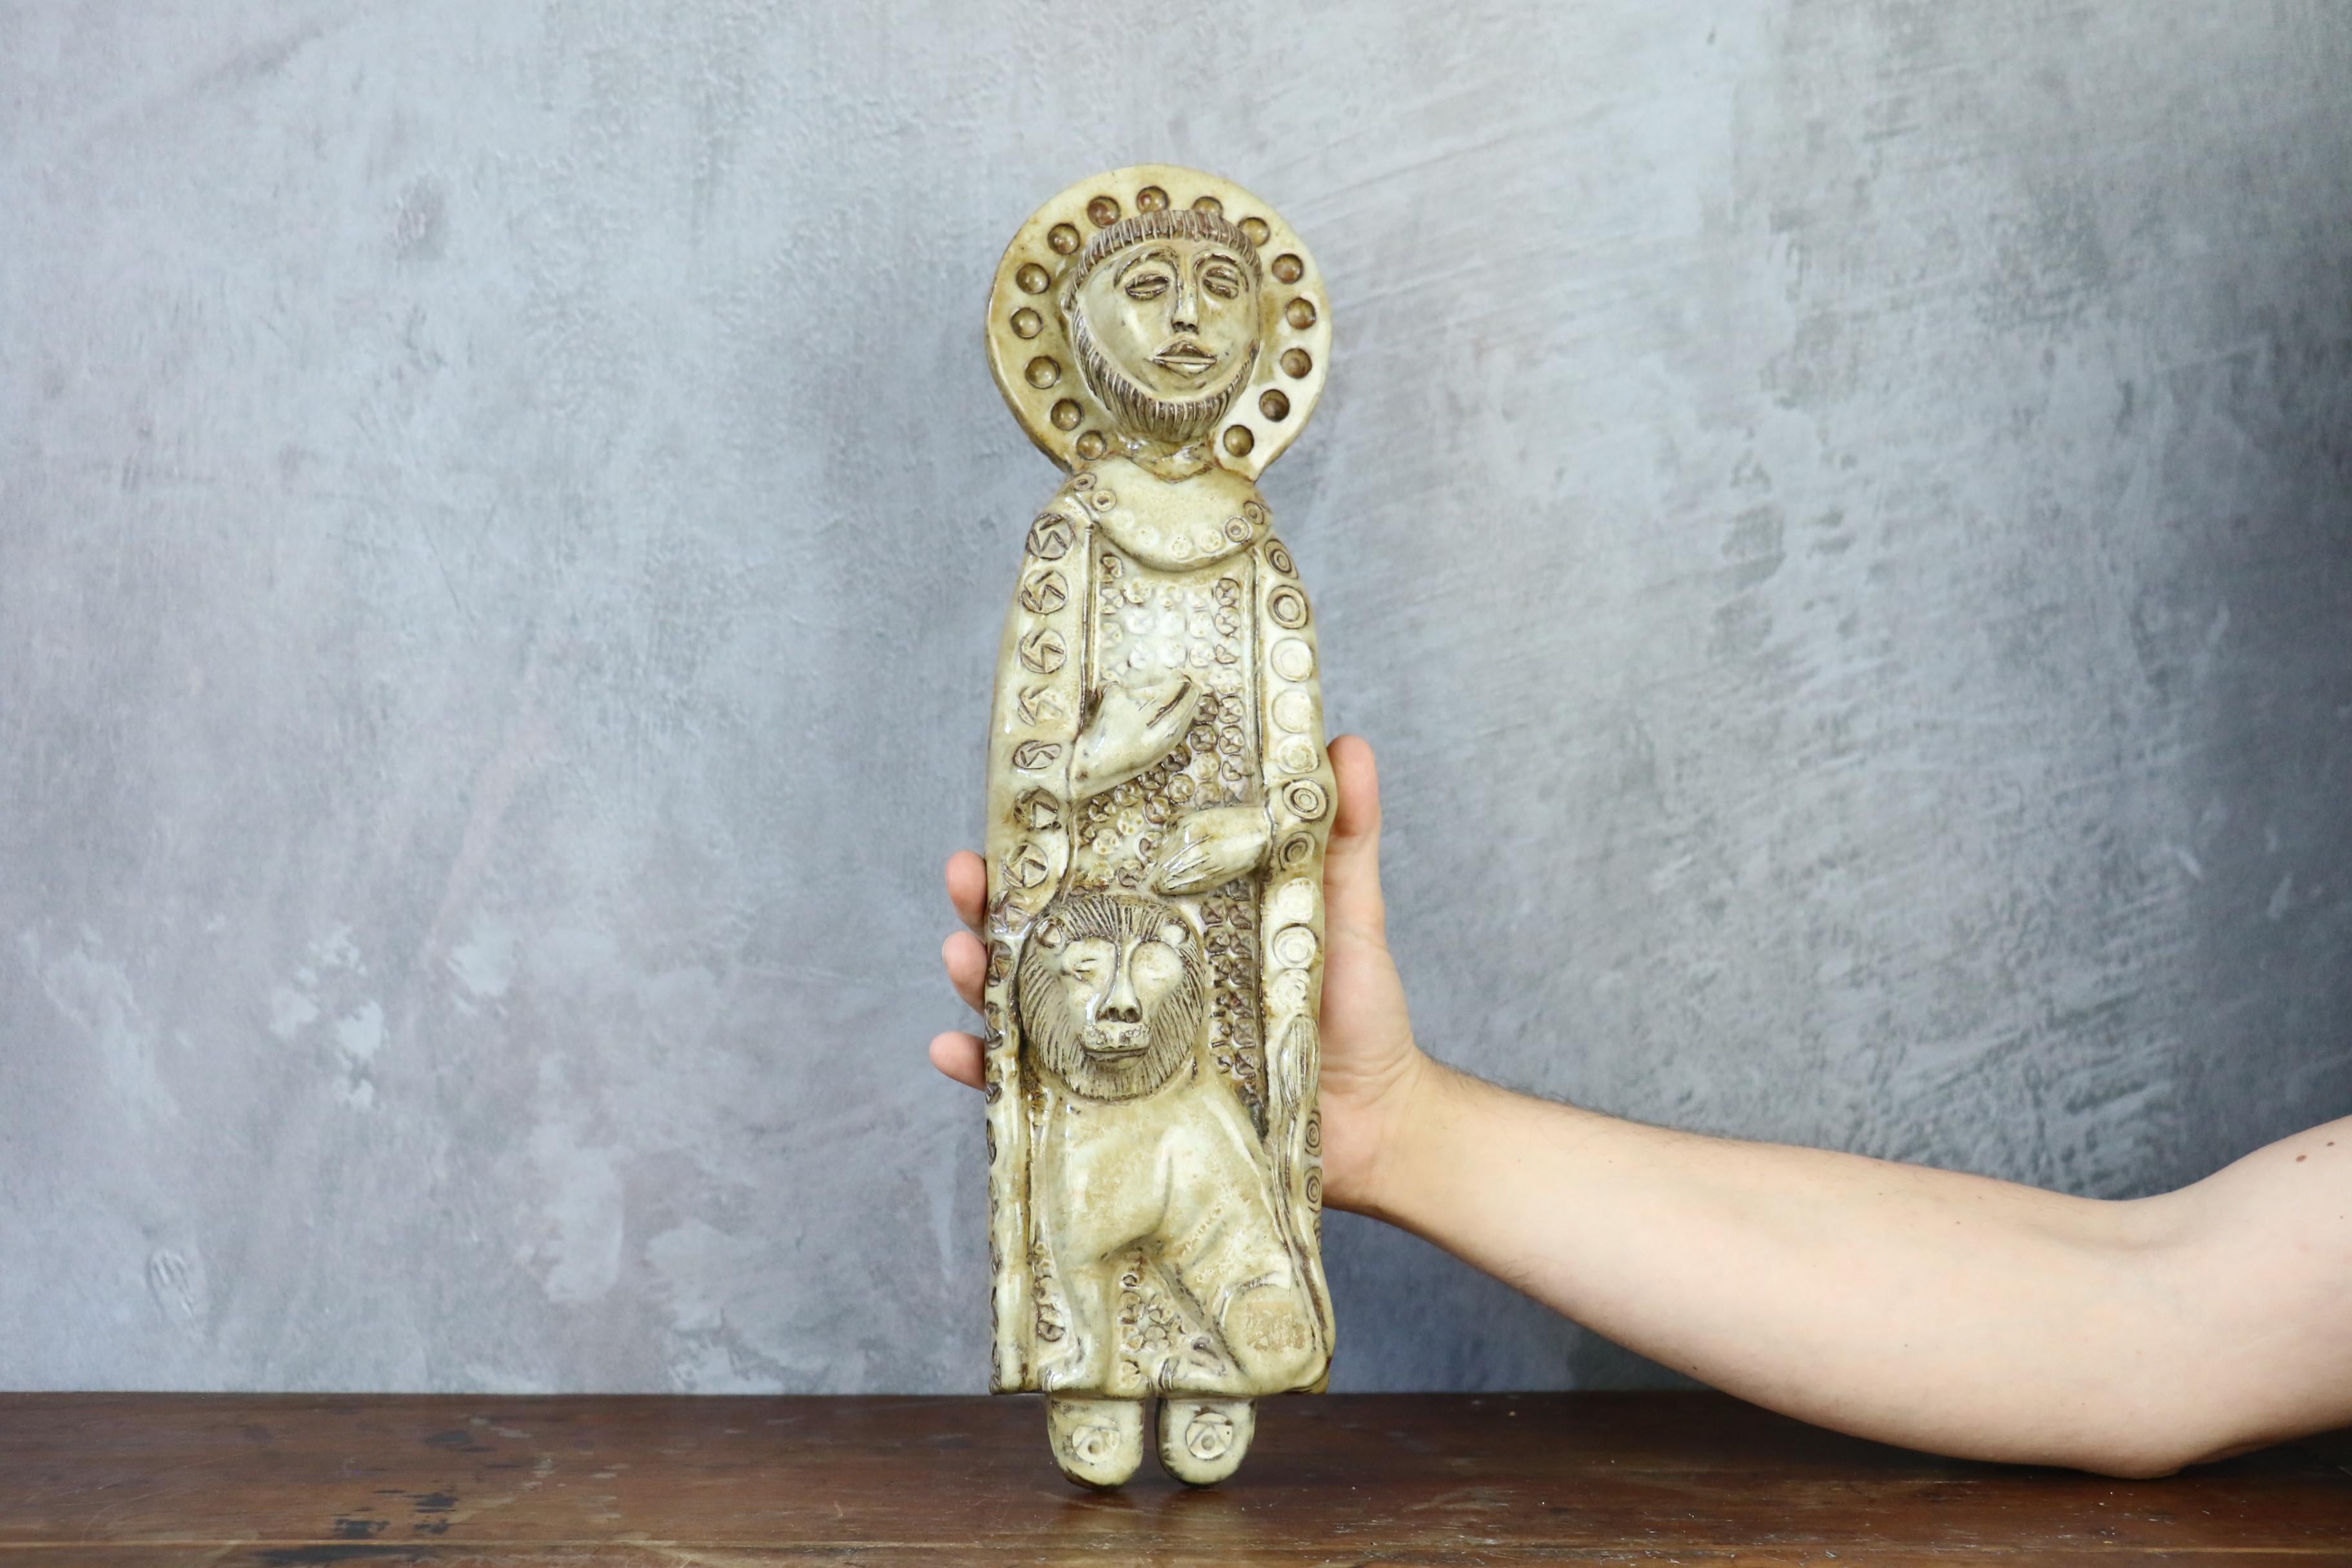 Ceramic wall decoration of Saint Mark by the french ceramist Robert Chiazzo


Robert Chiazzo (1924 - 2020) was a French painter and ceramist.

Pastry chef, farm worker, then house painter, he enlisted during the Second World War, becoming a